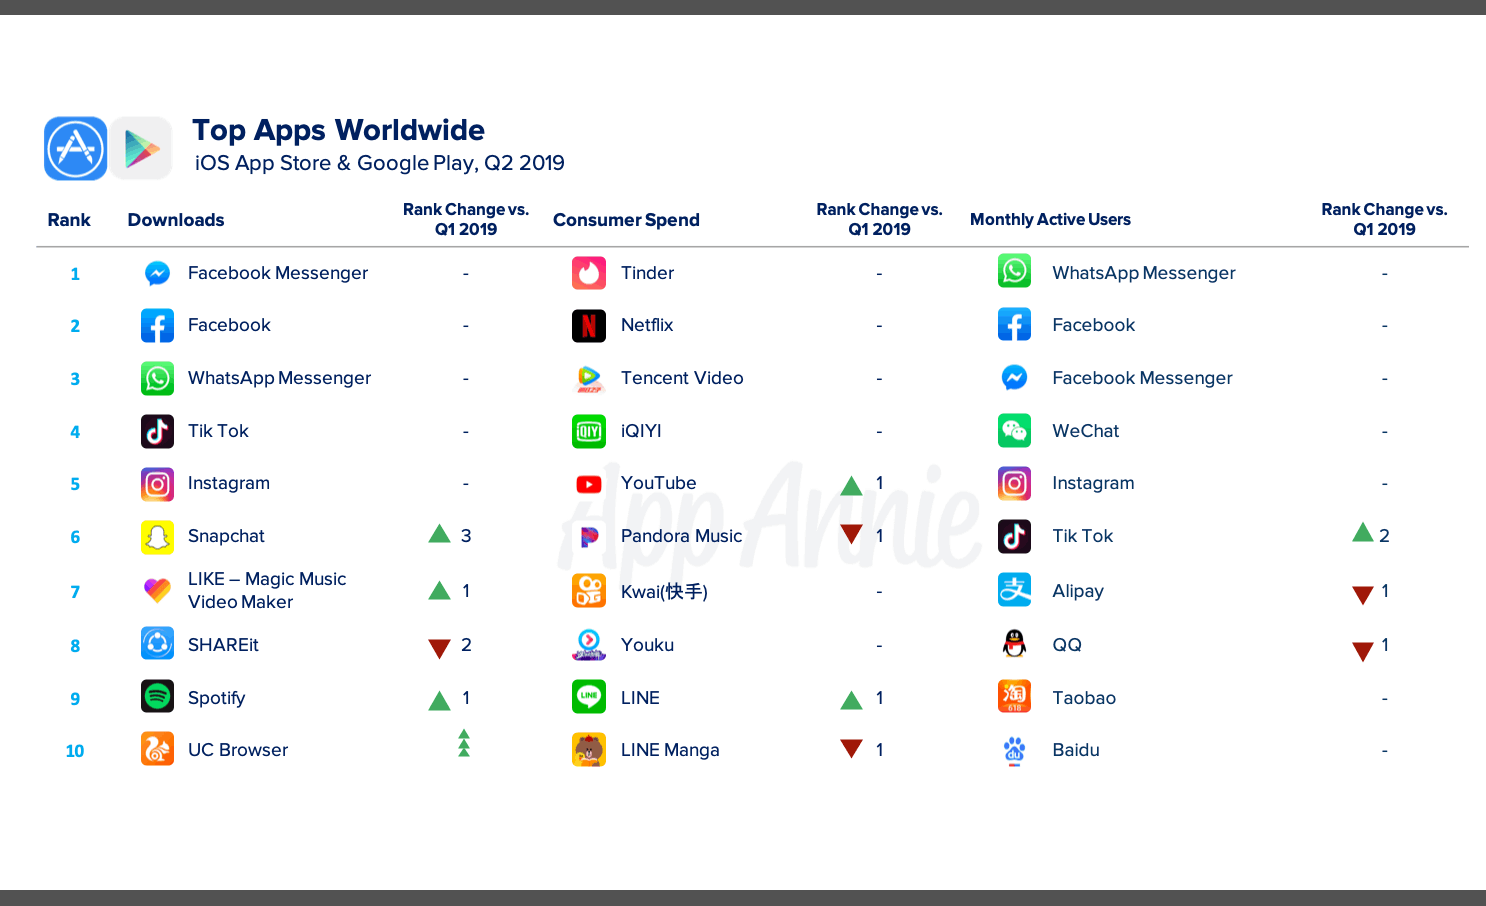 Report Messenger And Facebook Rank The Highest In Worldwide App